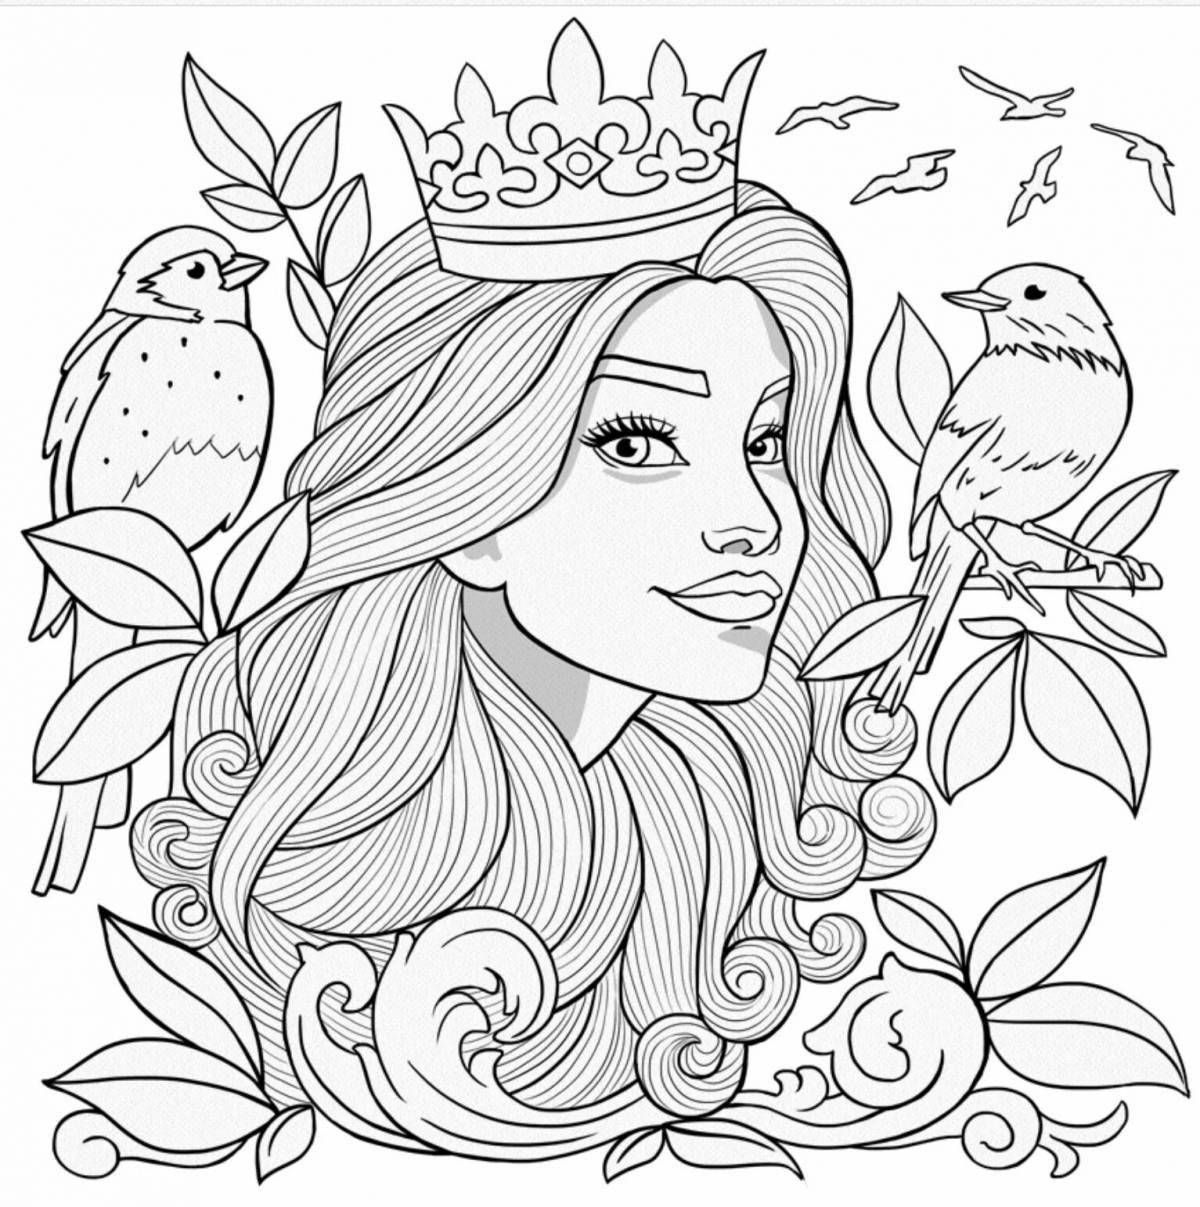 Outstanding coloring book for 13 year old girls